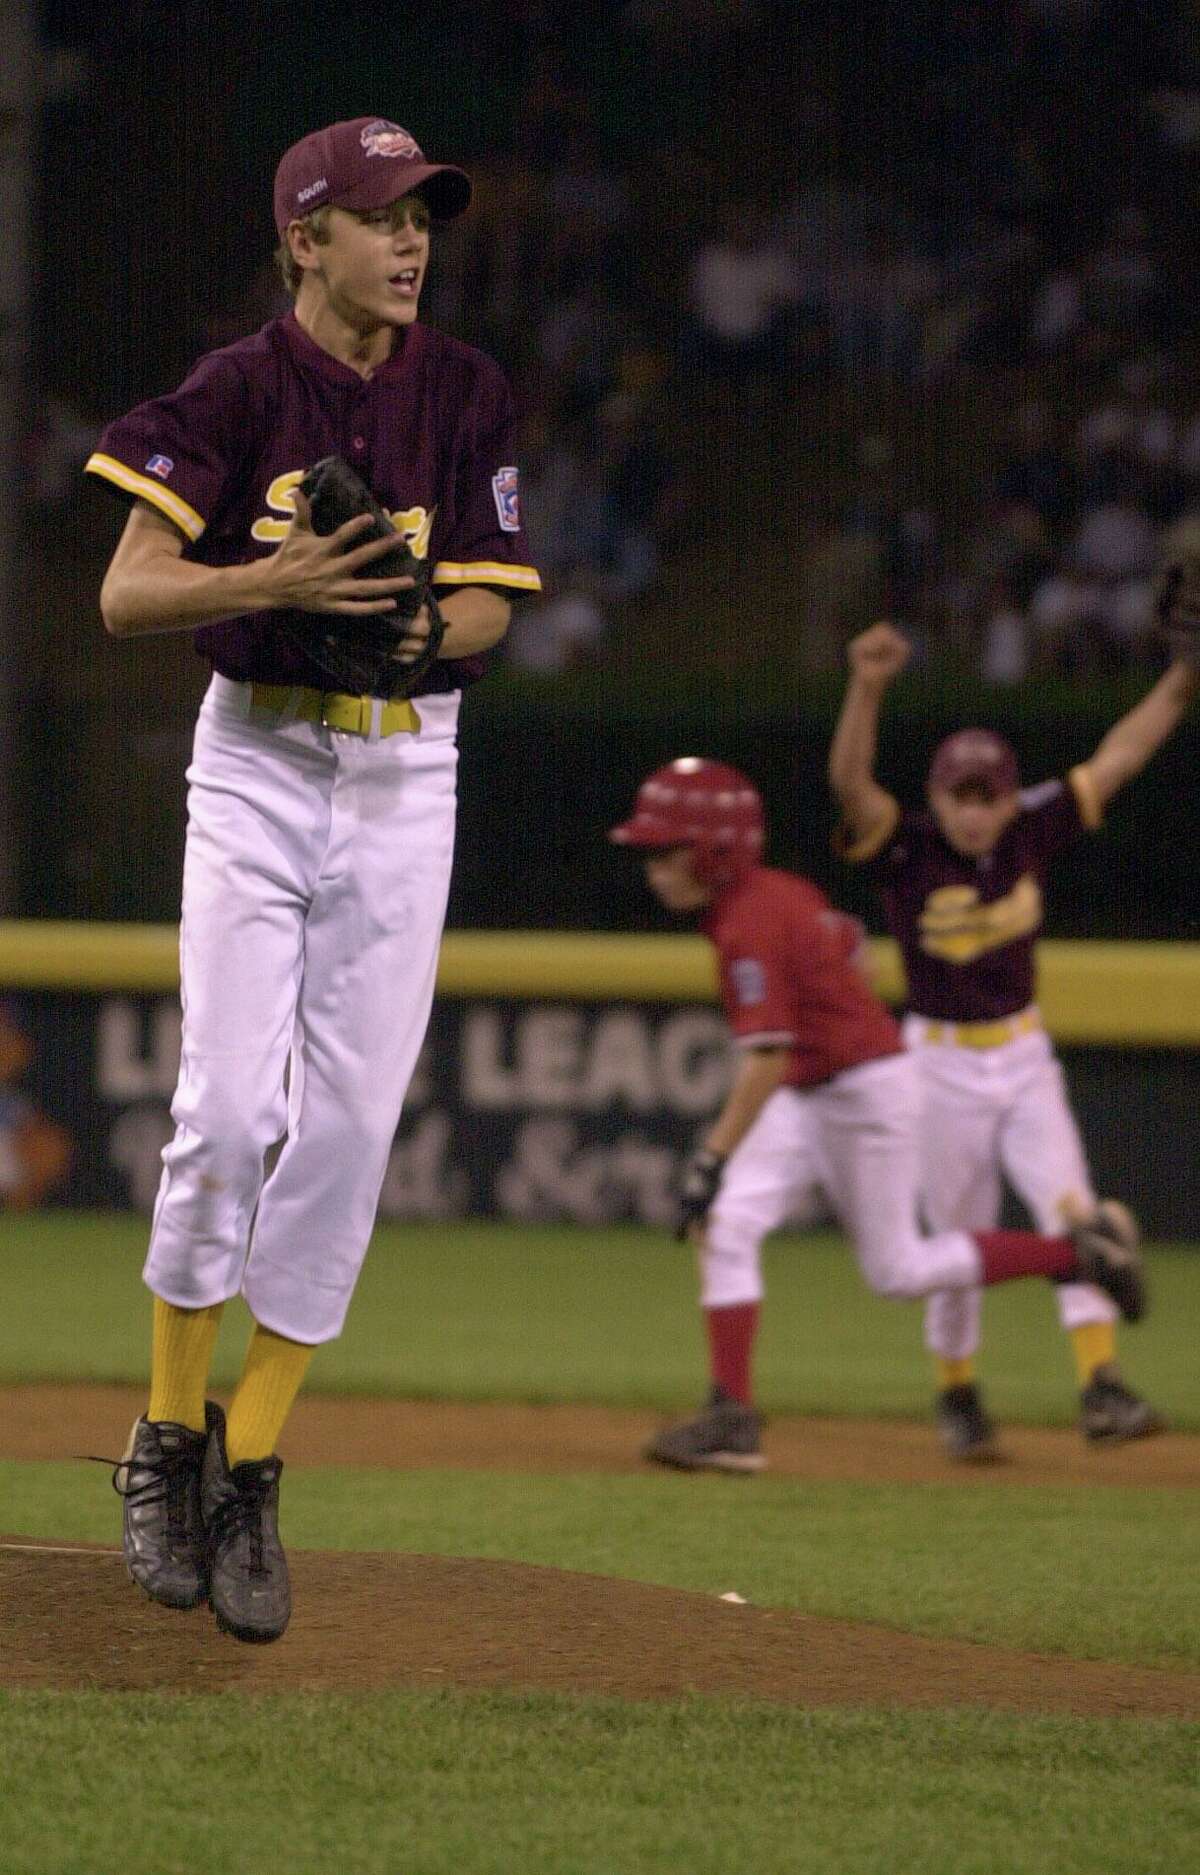 Bellaire pitcher Ross Haggard leaps off the mound after the final out in a 8-0 victory over Davenport, Iowa in the US Championship game at Howard J. Lamade Stadium in Williamsport, Pa., Thursday night, August 24, 2000 at the 2000 Little League World Series. Haggard had 13 stickouts in the game. (Smiley N. Pool/Chronicle) .